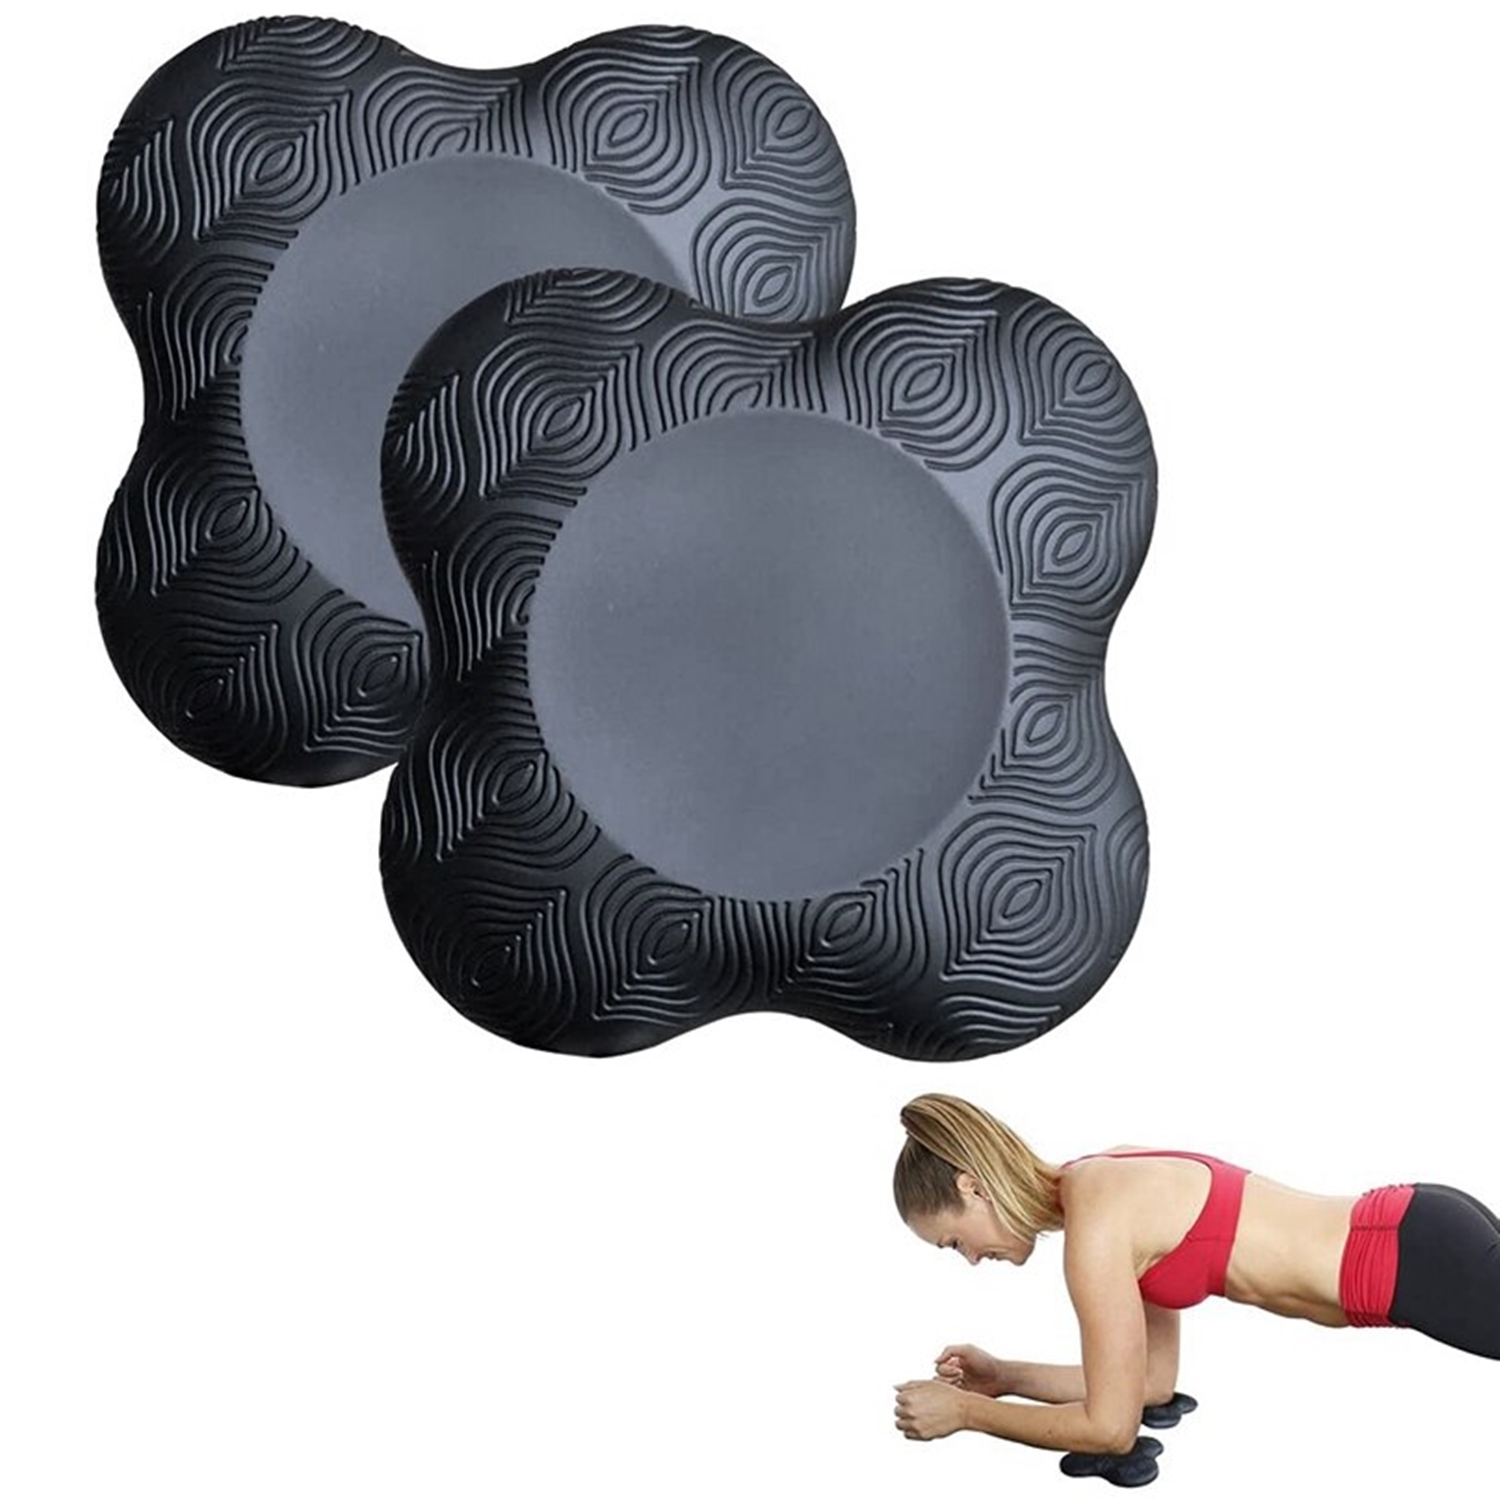 Helix Yoga Knee and Elbow Pad